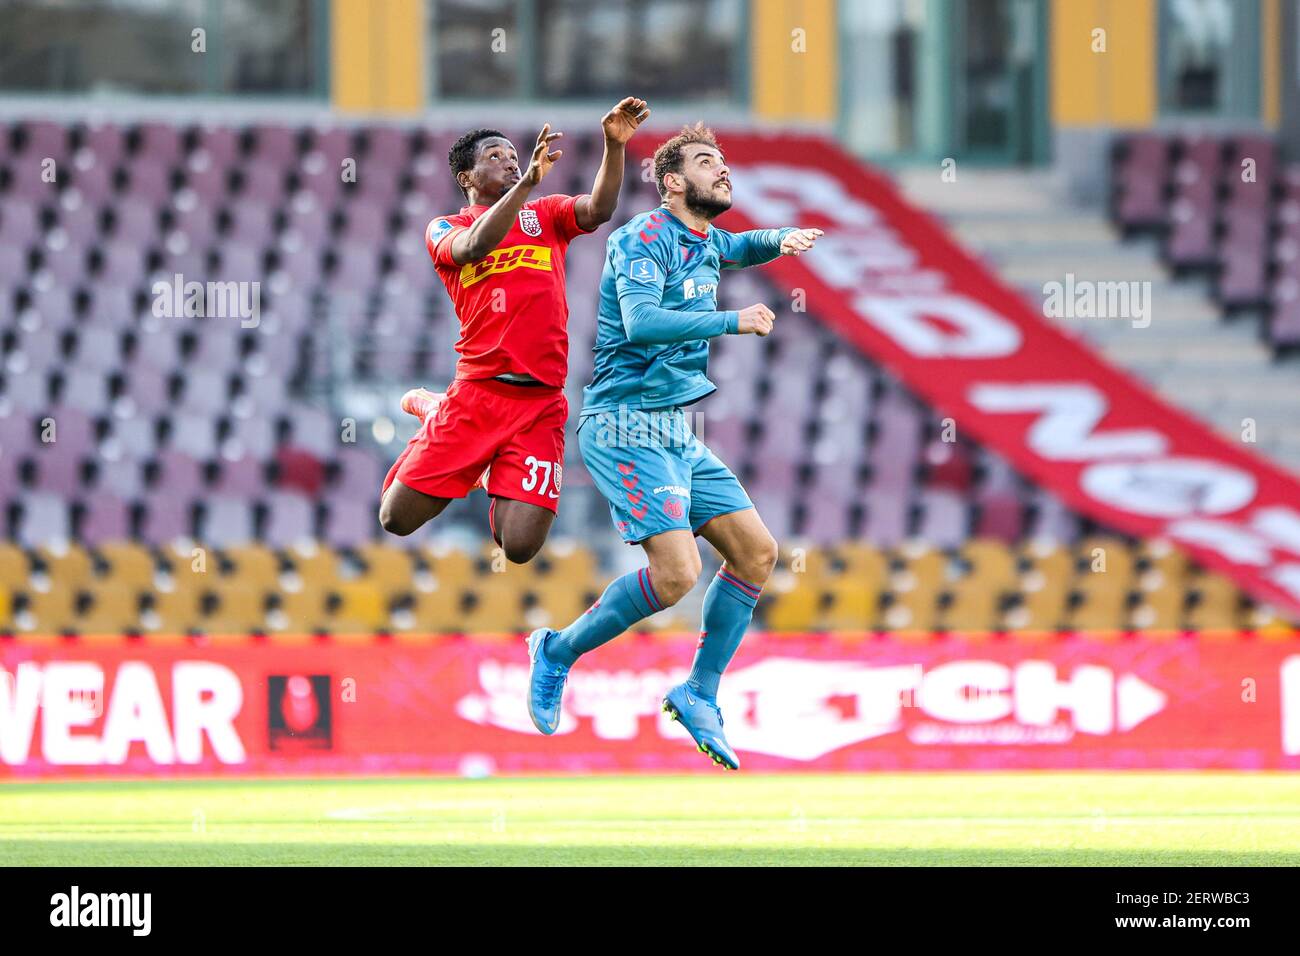 Page 6 - Fodbold High Resolution Stock Photography and Images - Alamy